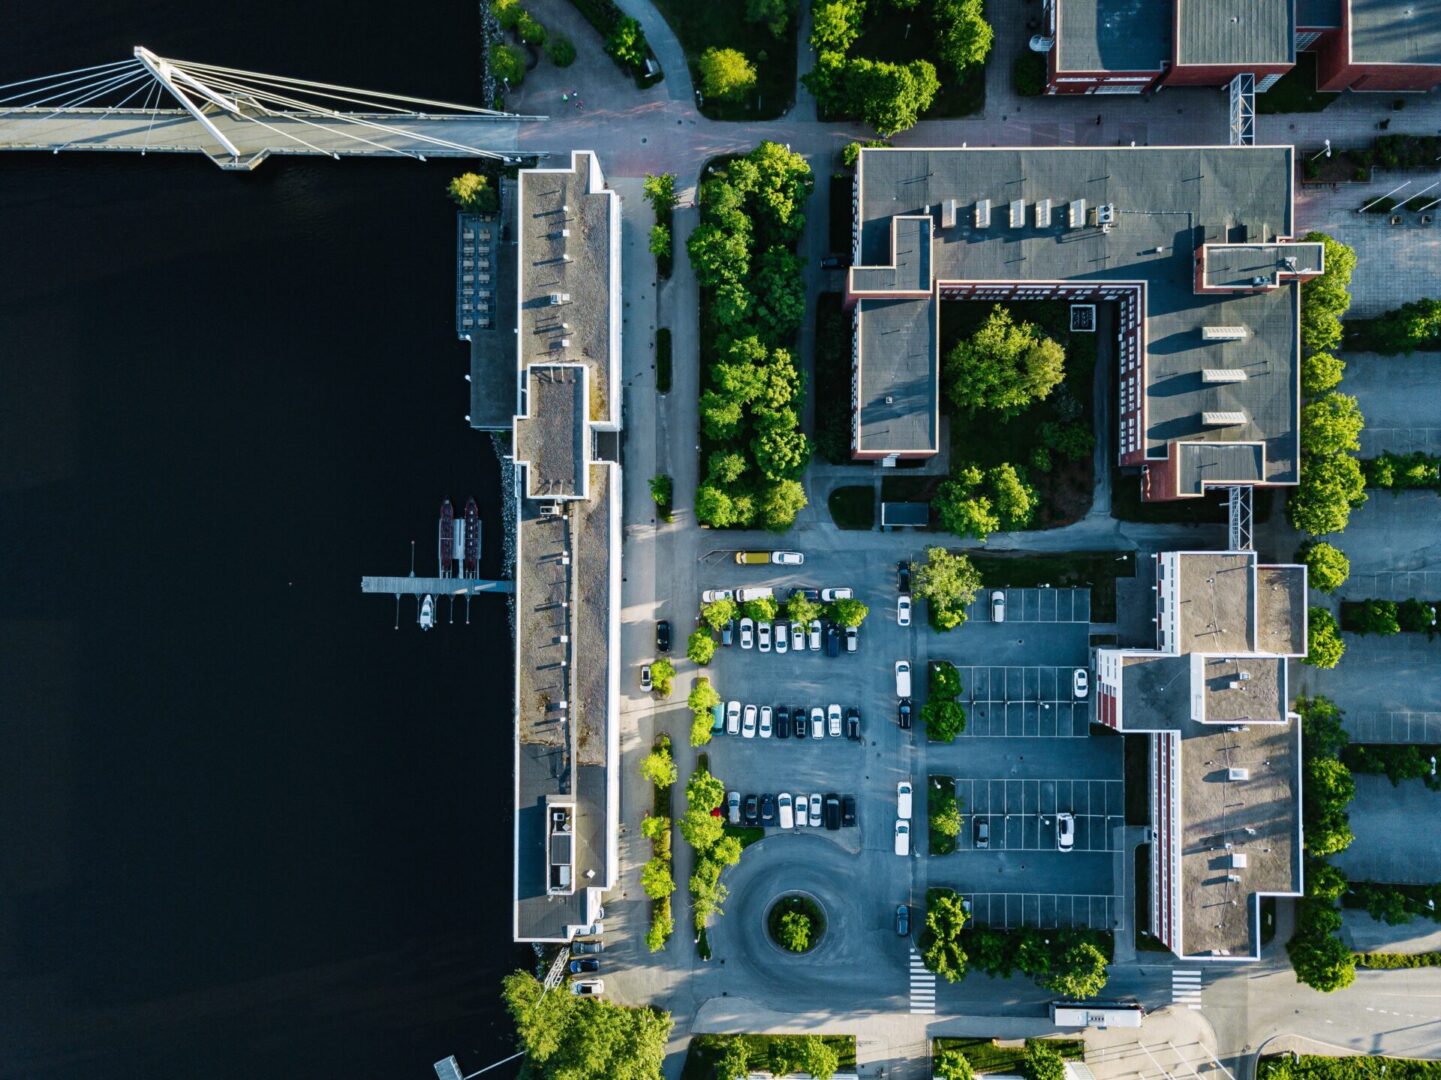 Aerial view of city buildings with car parking and lakeside. University of Jyvaskyla in Finland